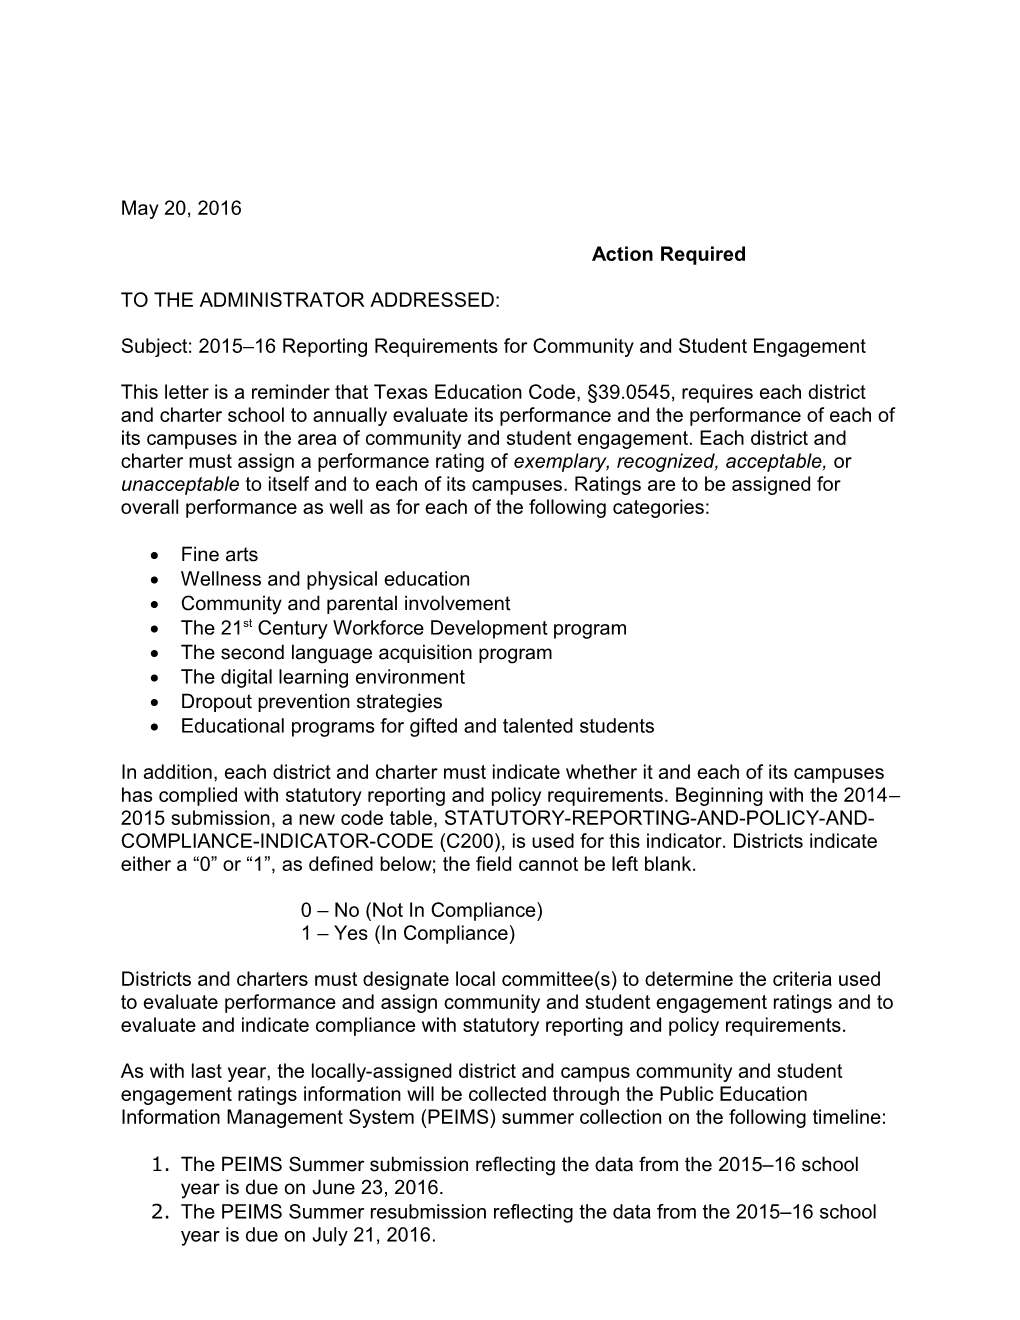 Subject: 2015 16 Reporting Requirements for Community and Student Engagement